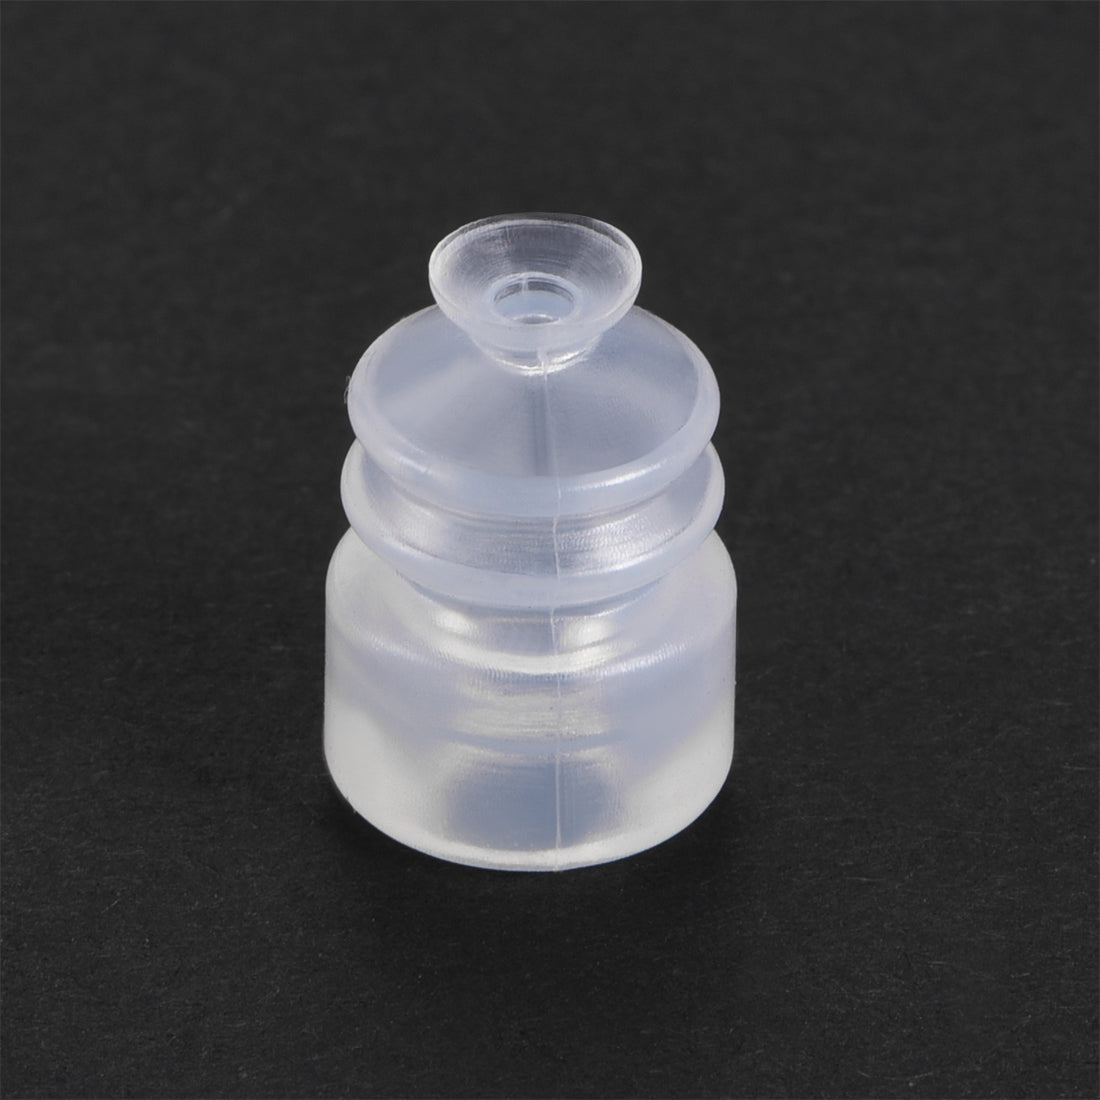 uxcell Uxcell Clear White Soft Silicone Waterproof Vacuum Suction Cup 5mmx5mm Bellows Suction Cup,4pcs